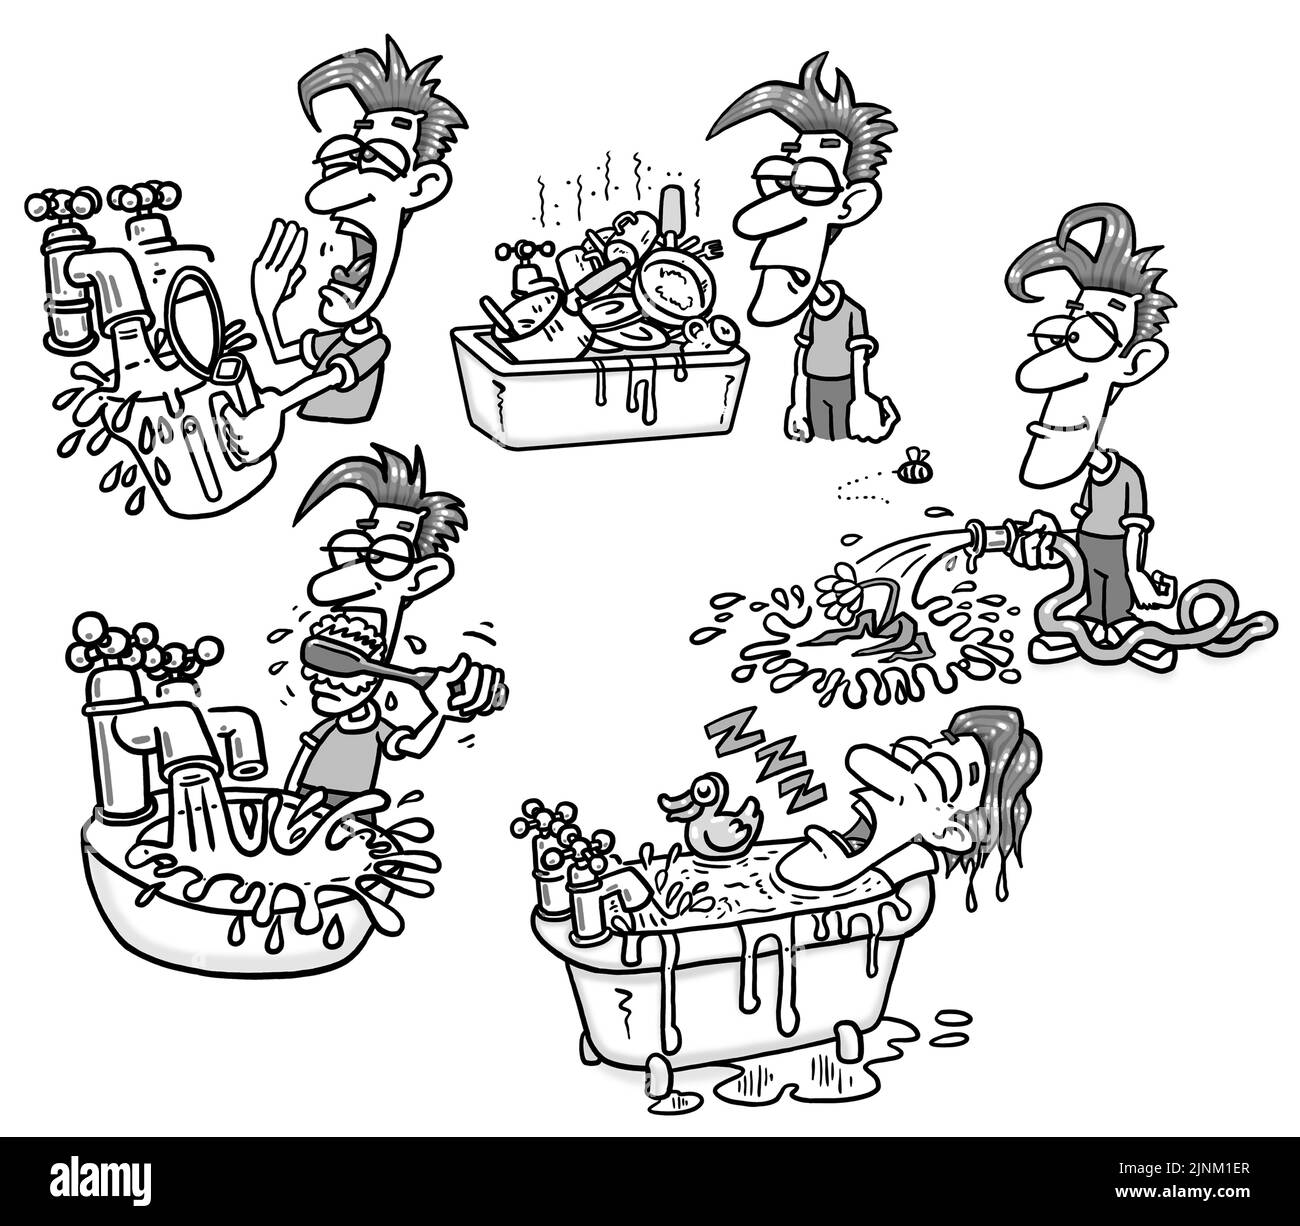 Concept art black & white line drawings showing water being wasted in home, washing up, long baths, hose pipe, filling kettle, suit worksheet posters Stock Photo